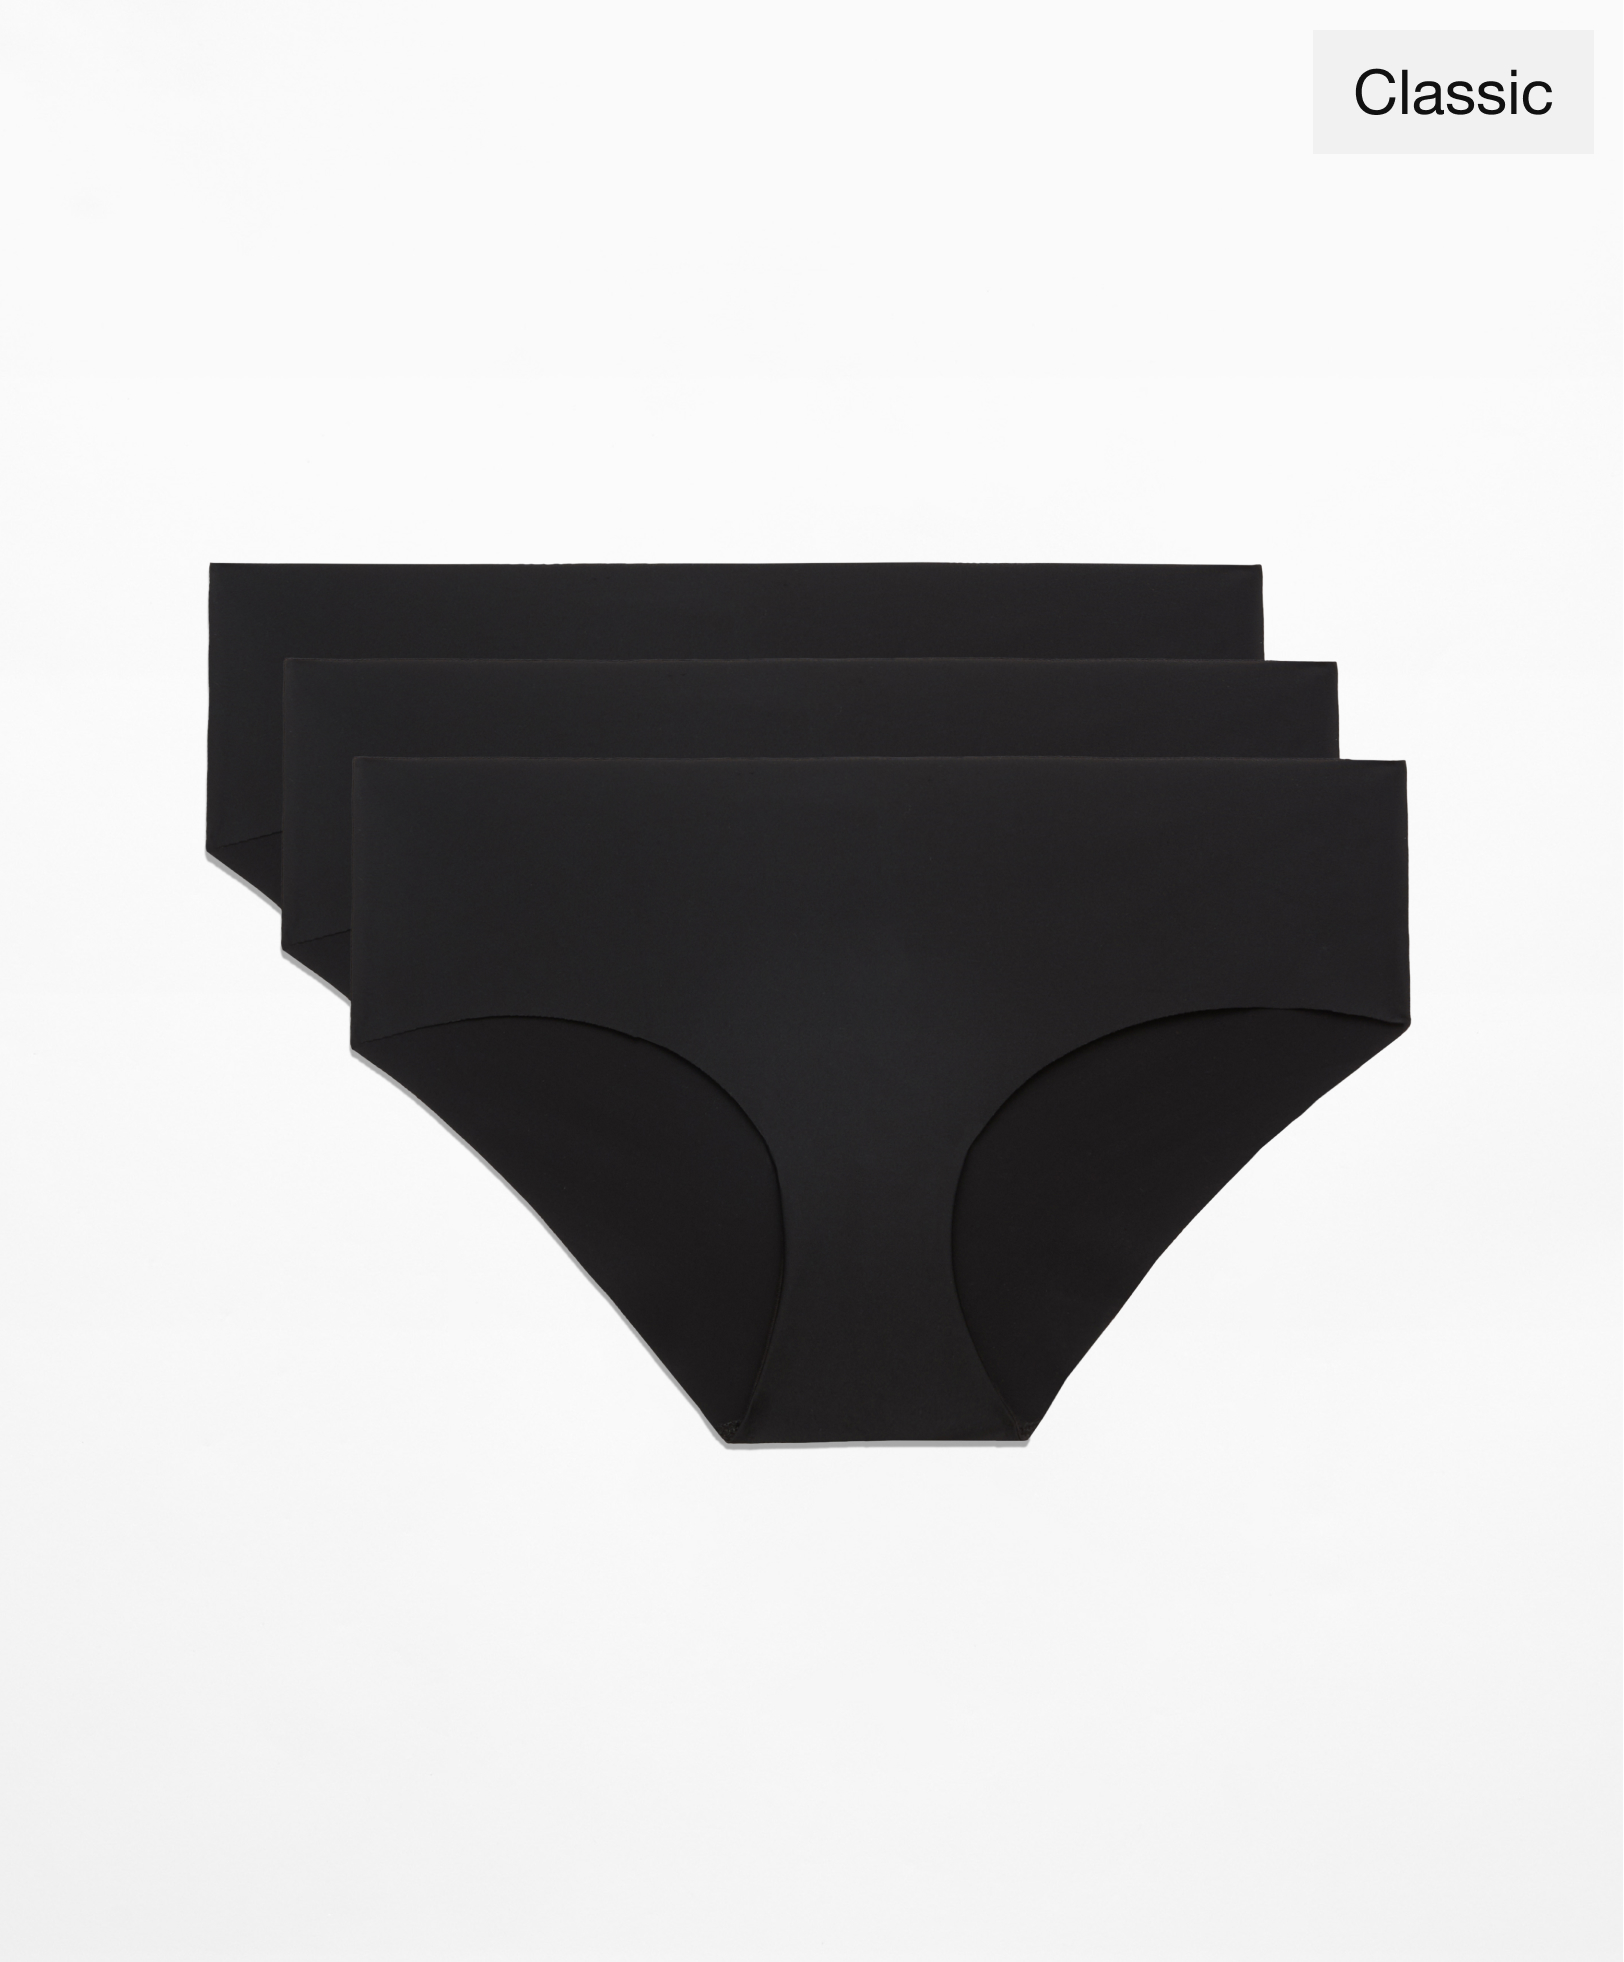 3 seamless soft-touch classic briefs